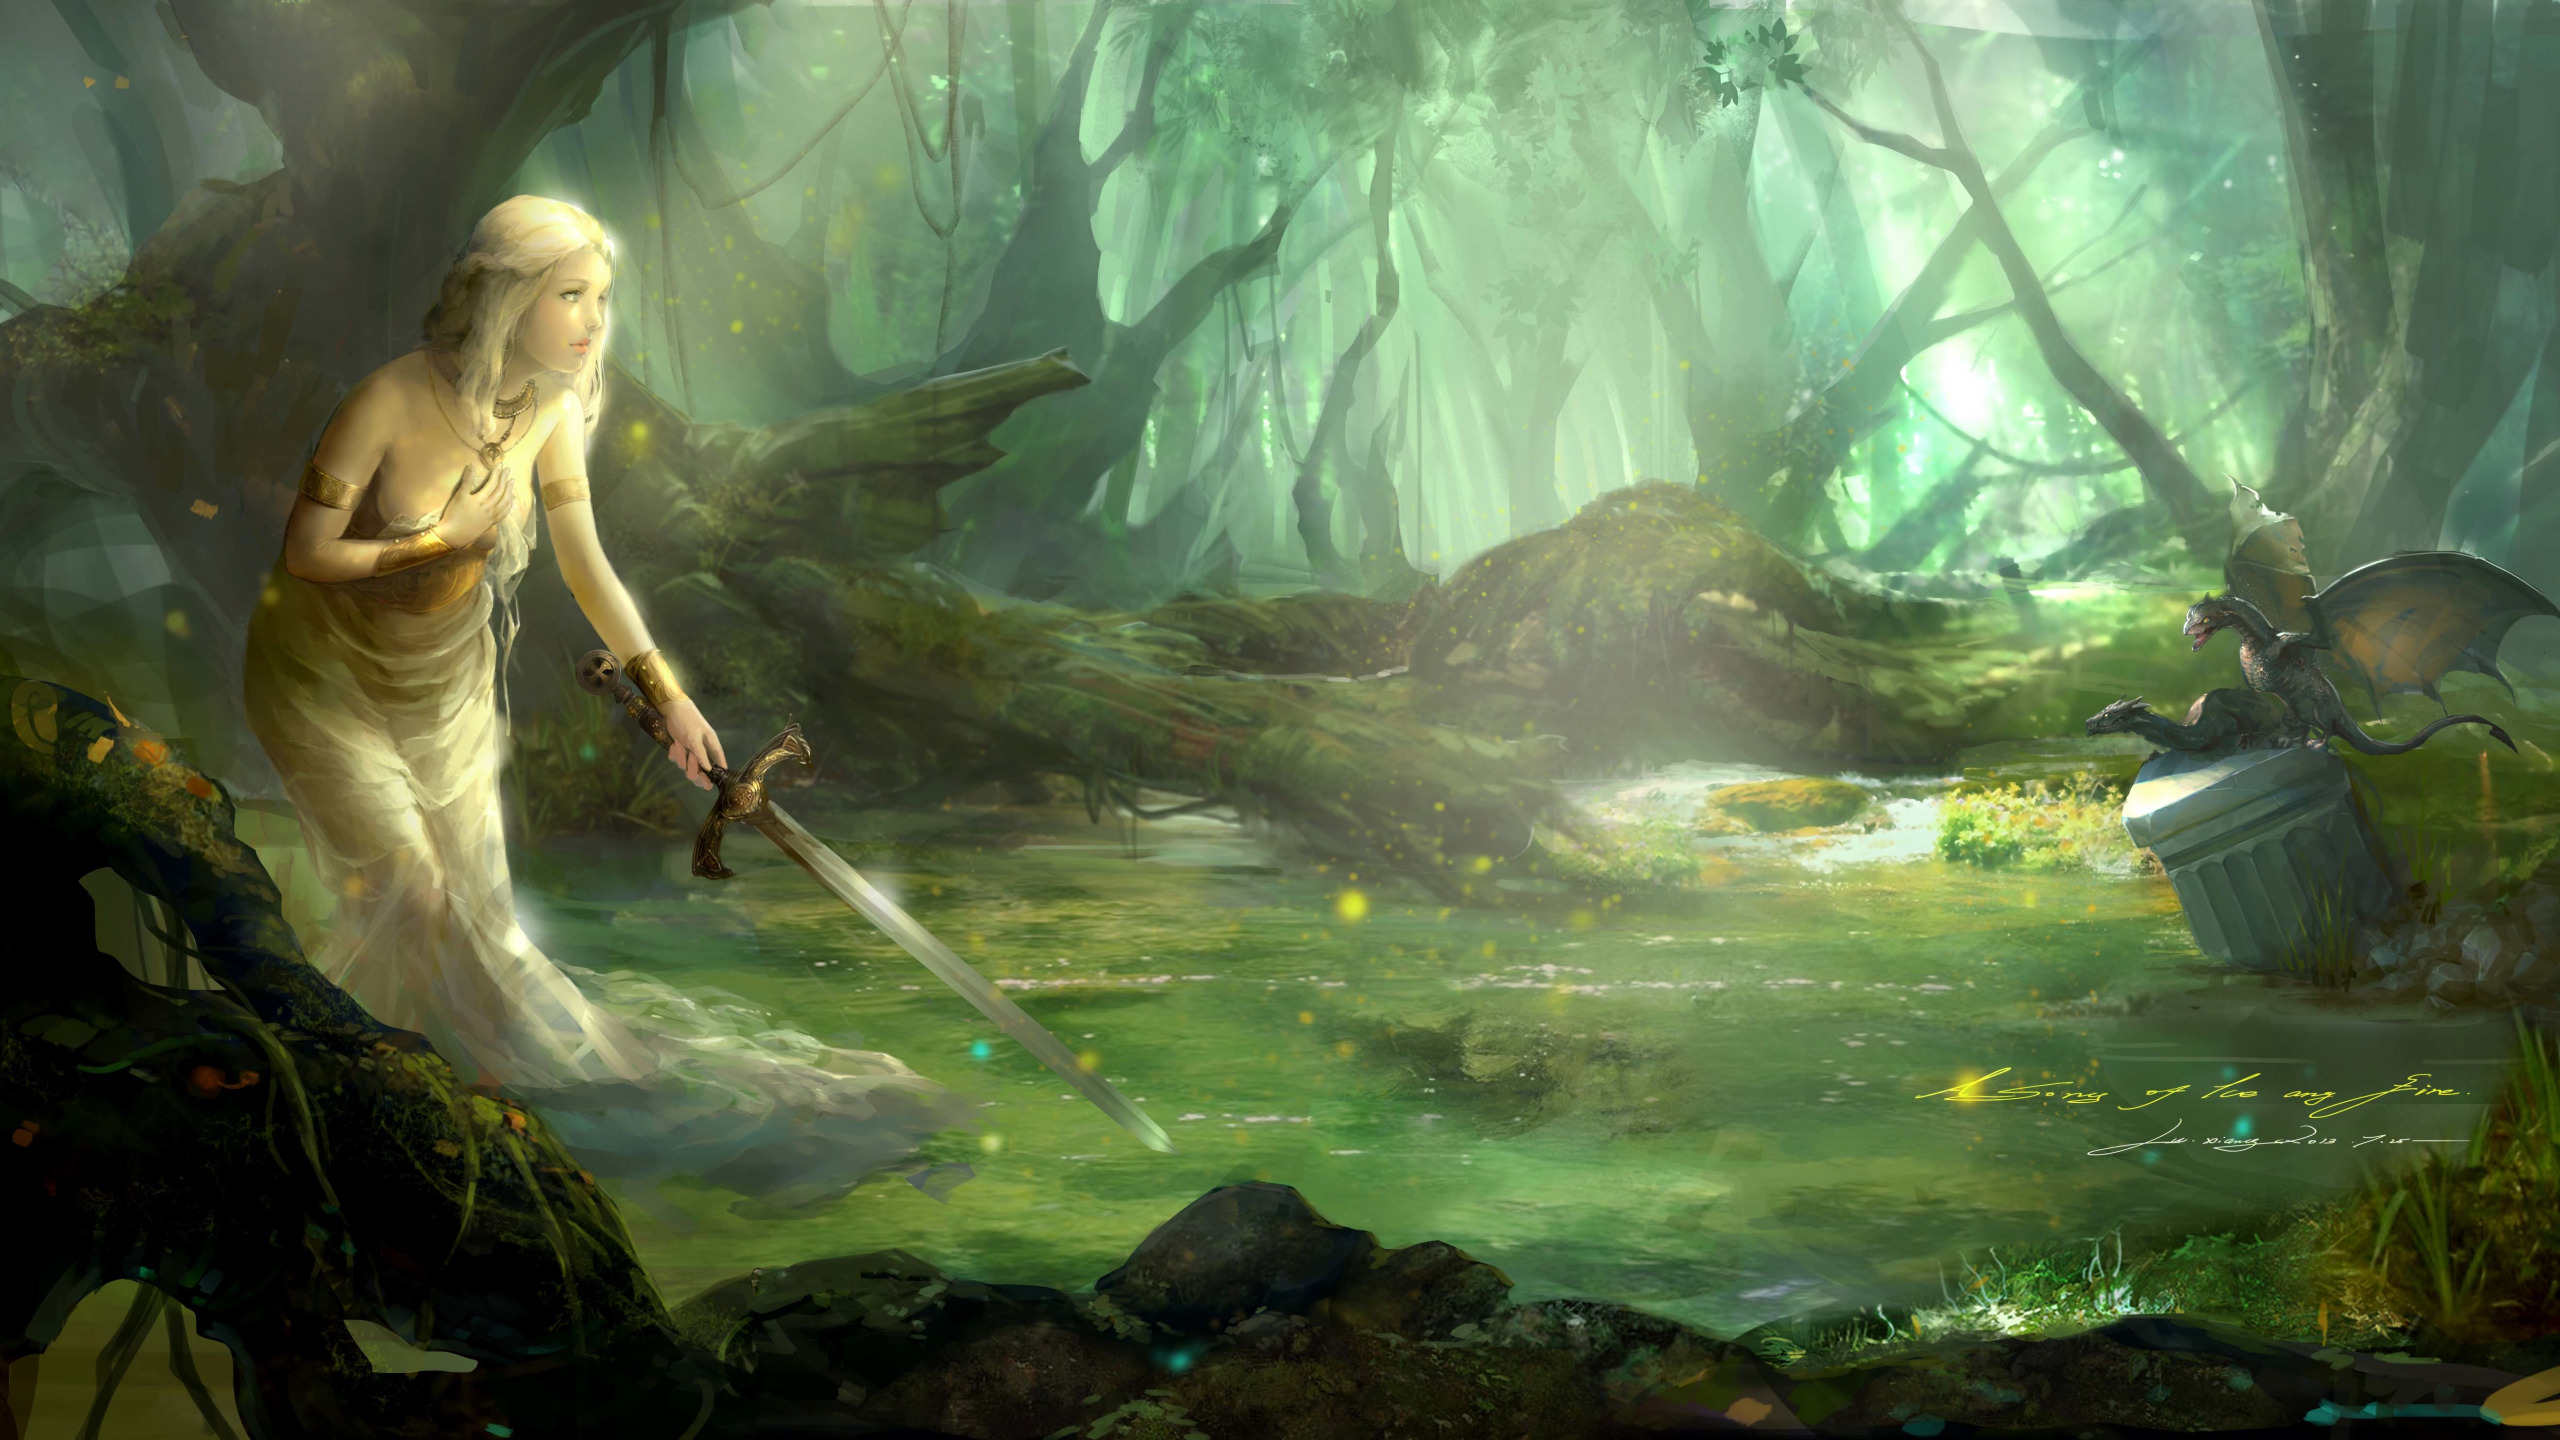 2560x1440 Download wallpaper forest, water, girl, dragons, sword, art, A Song of Ice and Fire, lu xiangxiang, section fantasy in resoluti